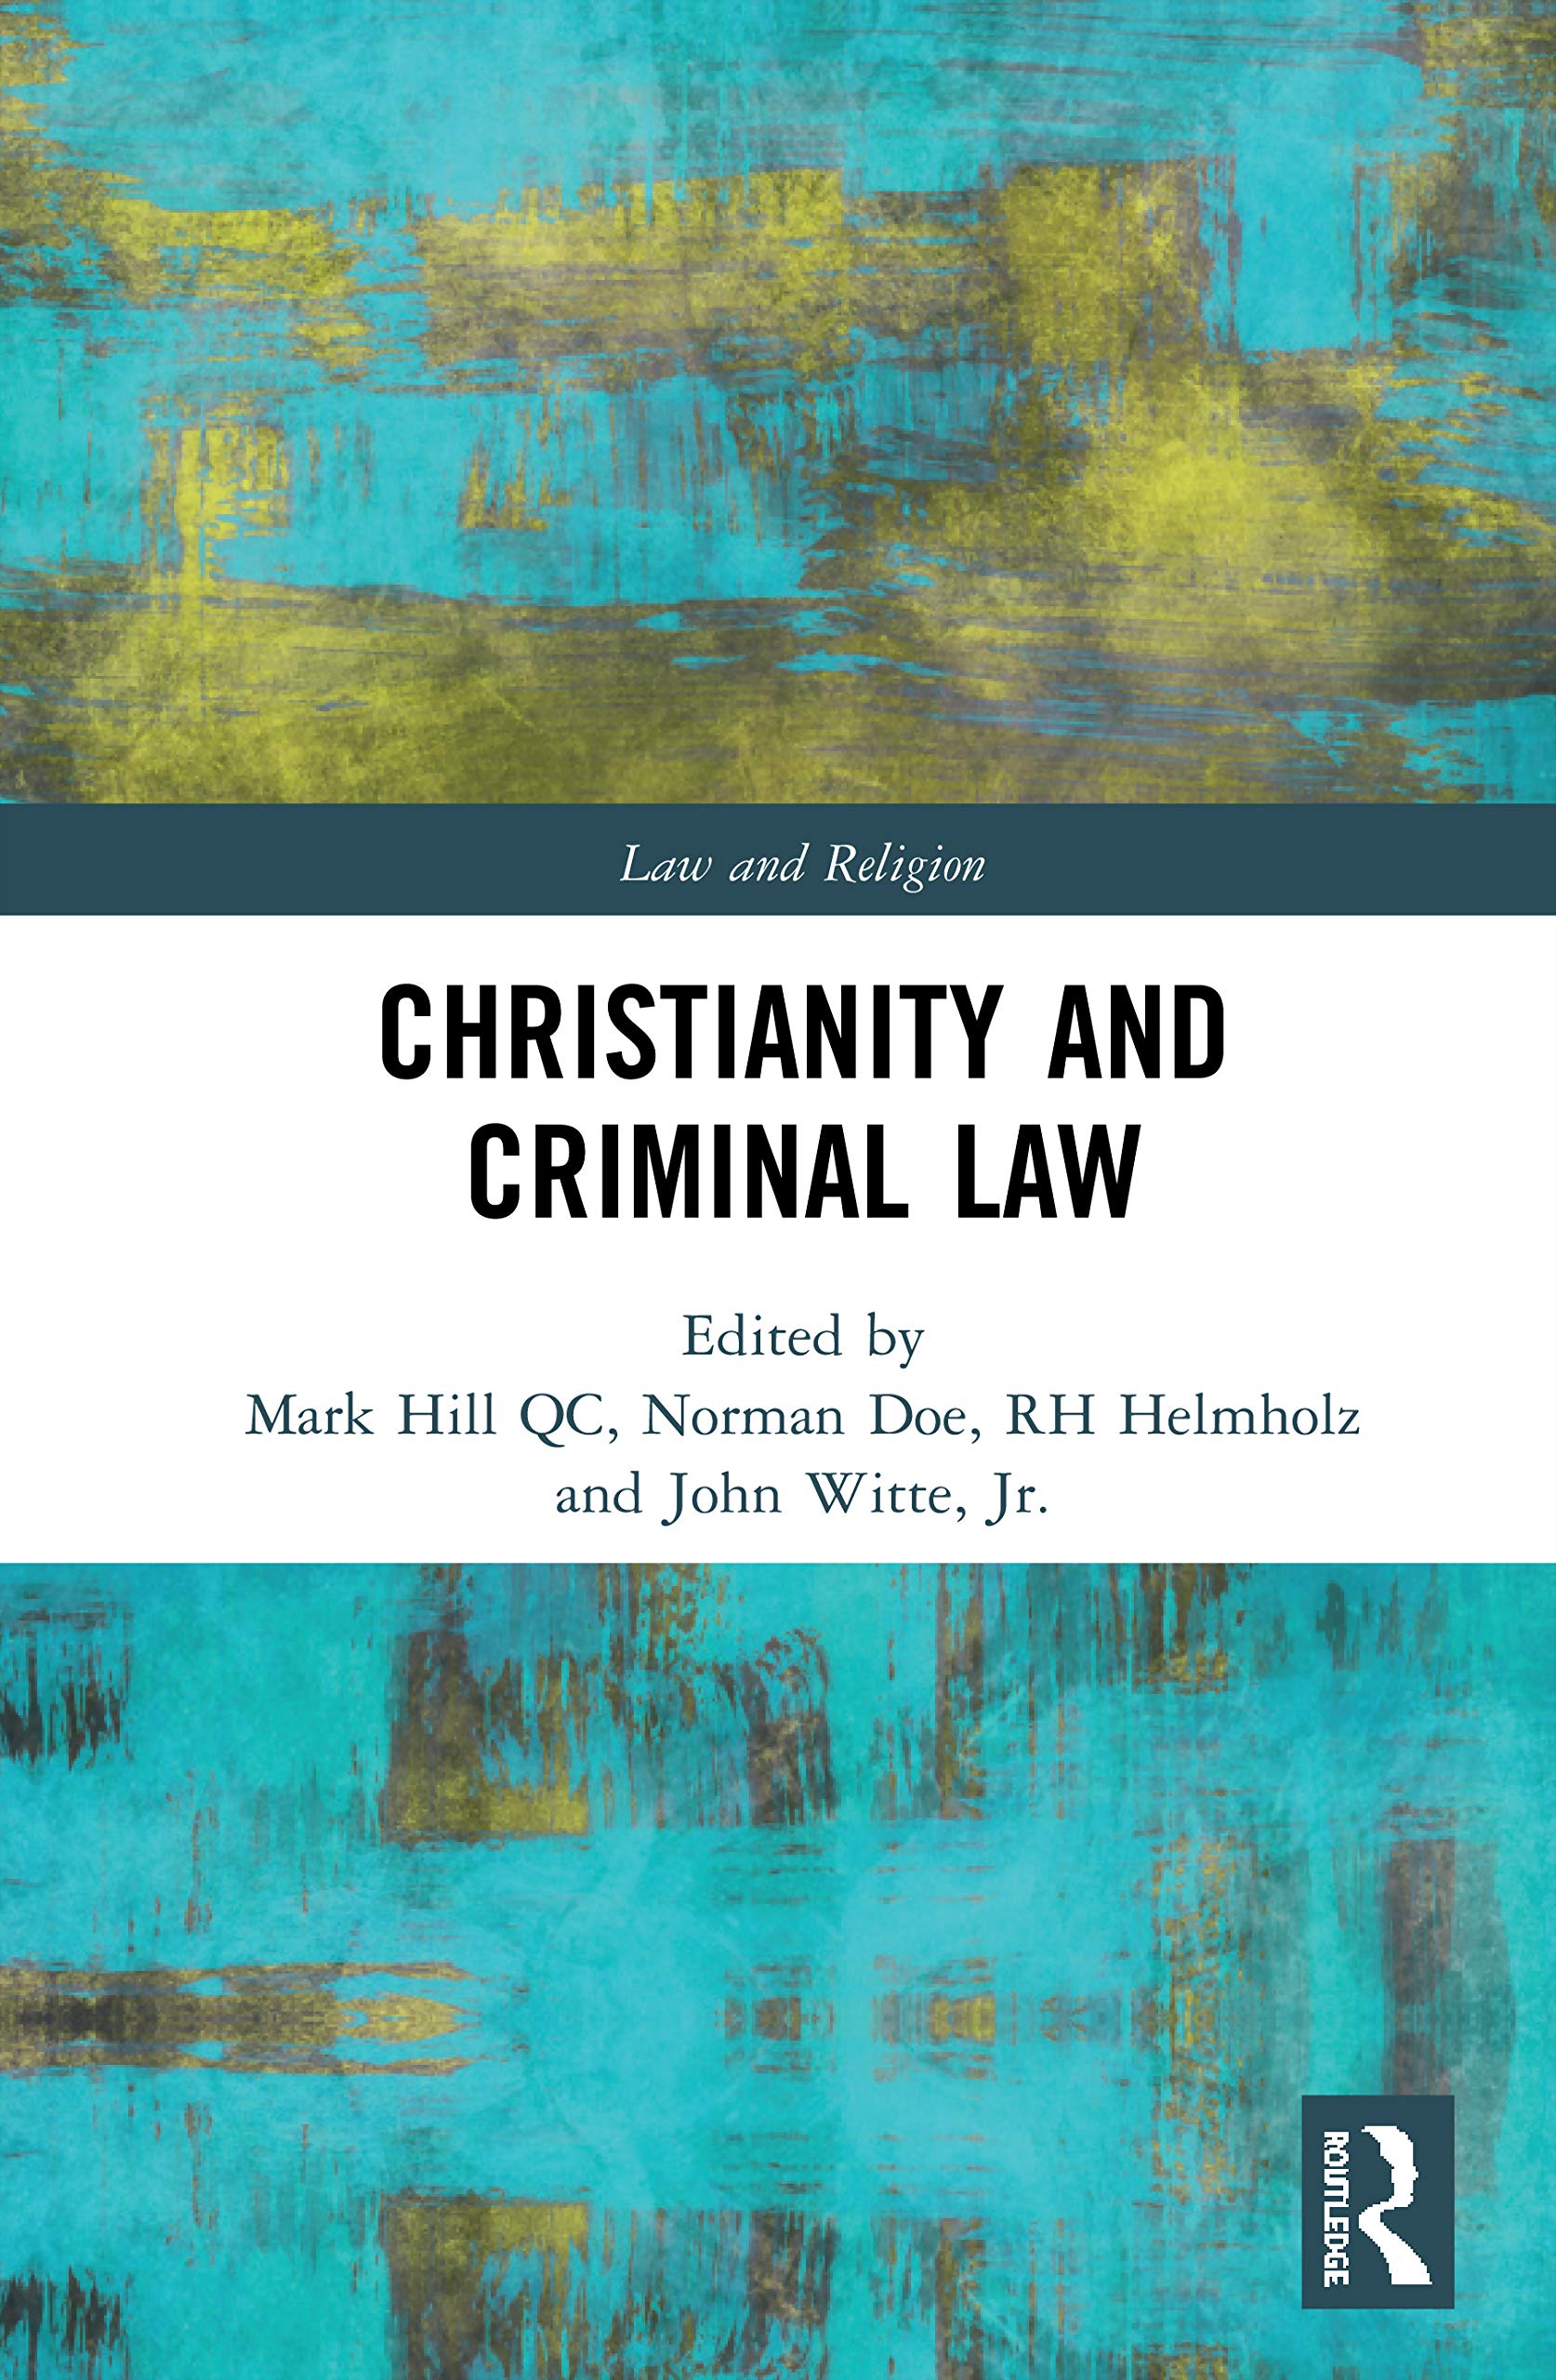 Christianity and Criminal Law (Law and Religion)